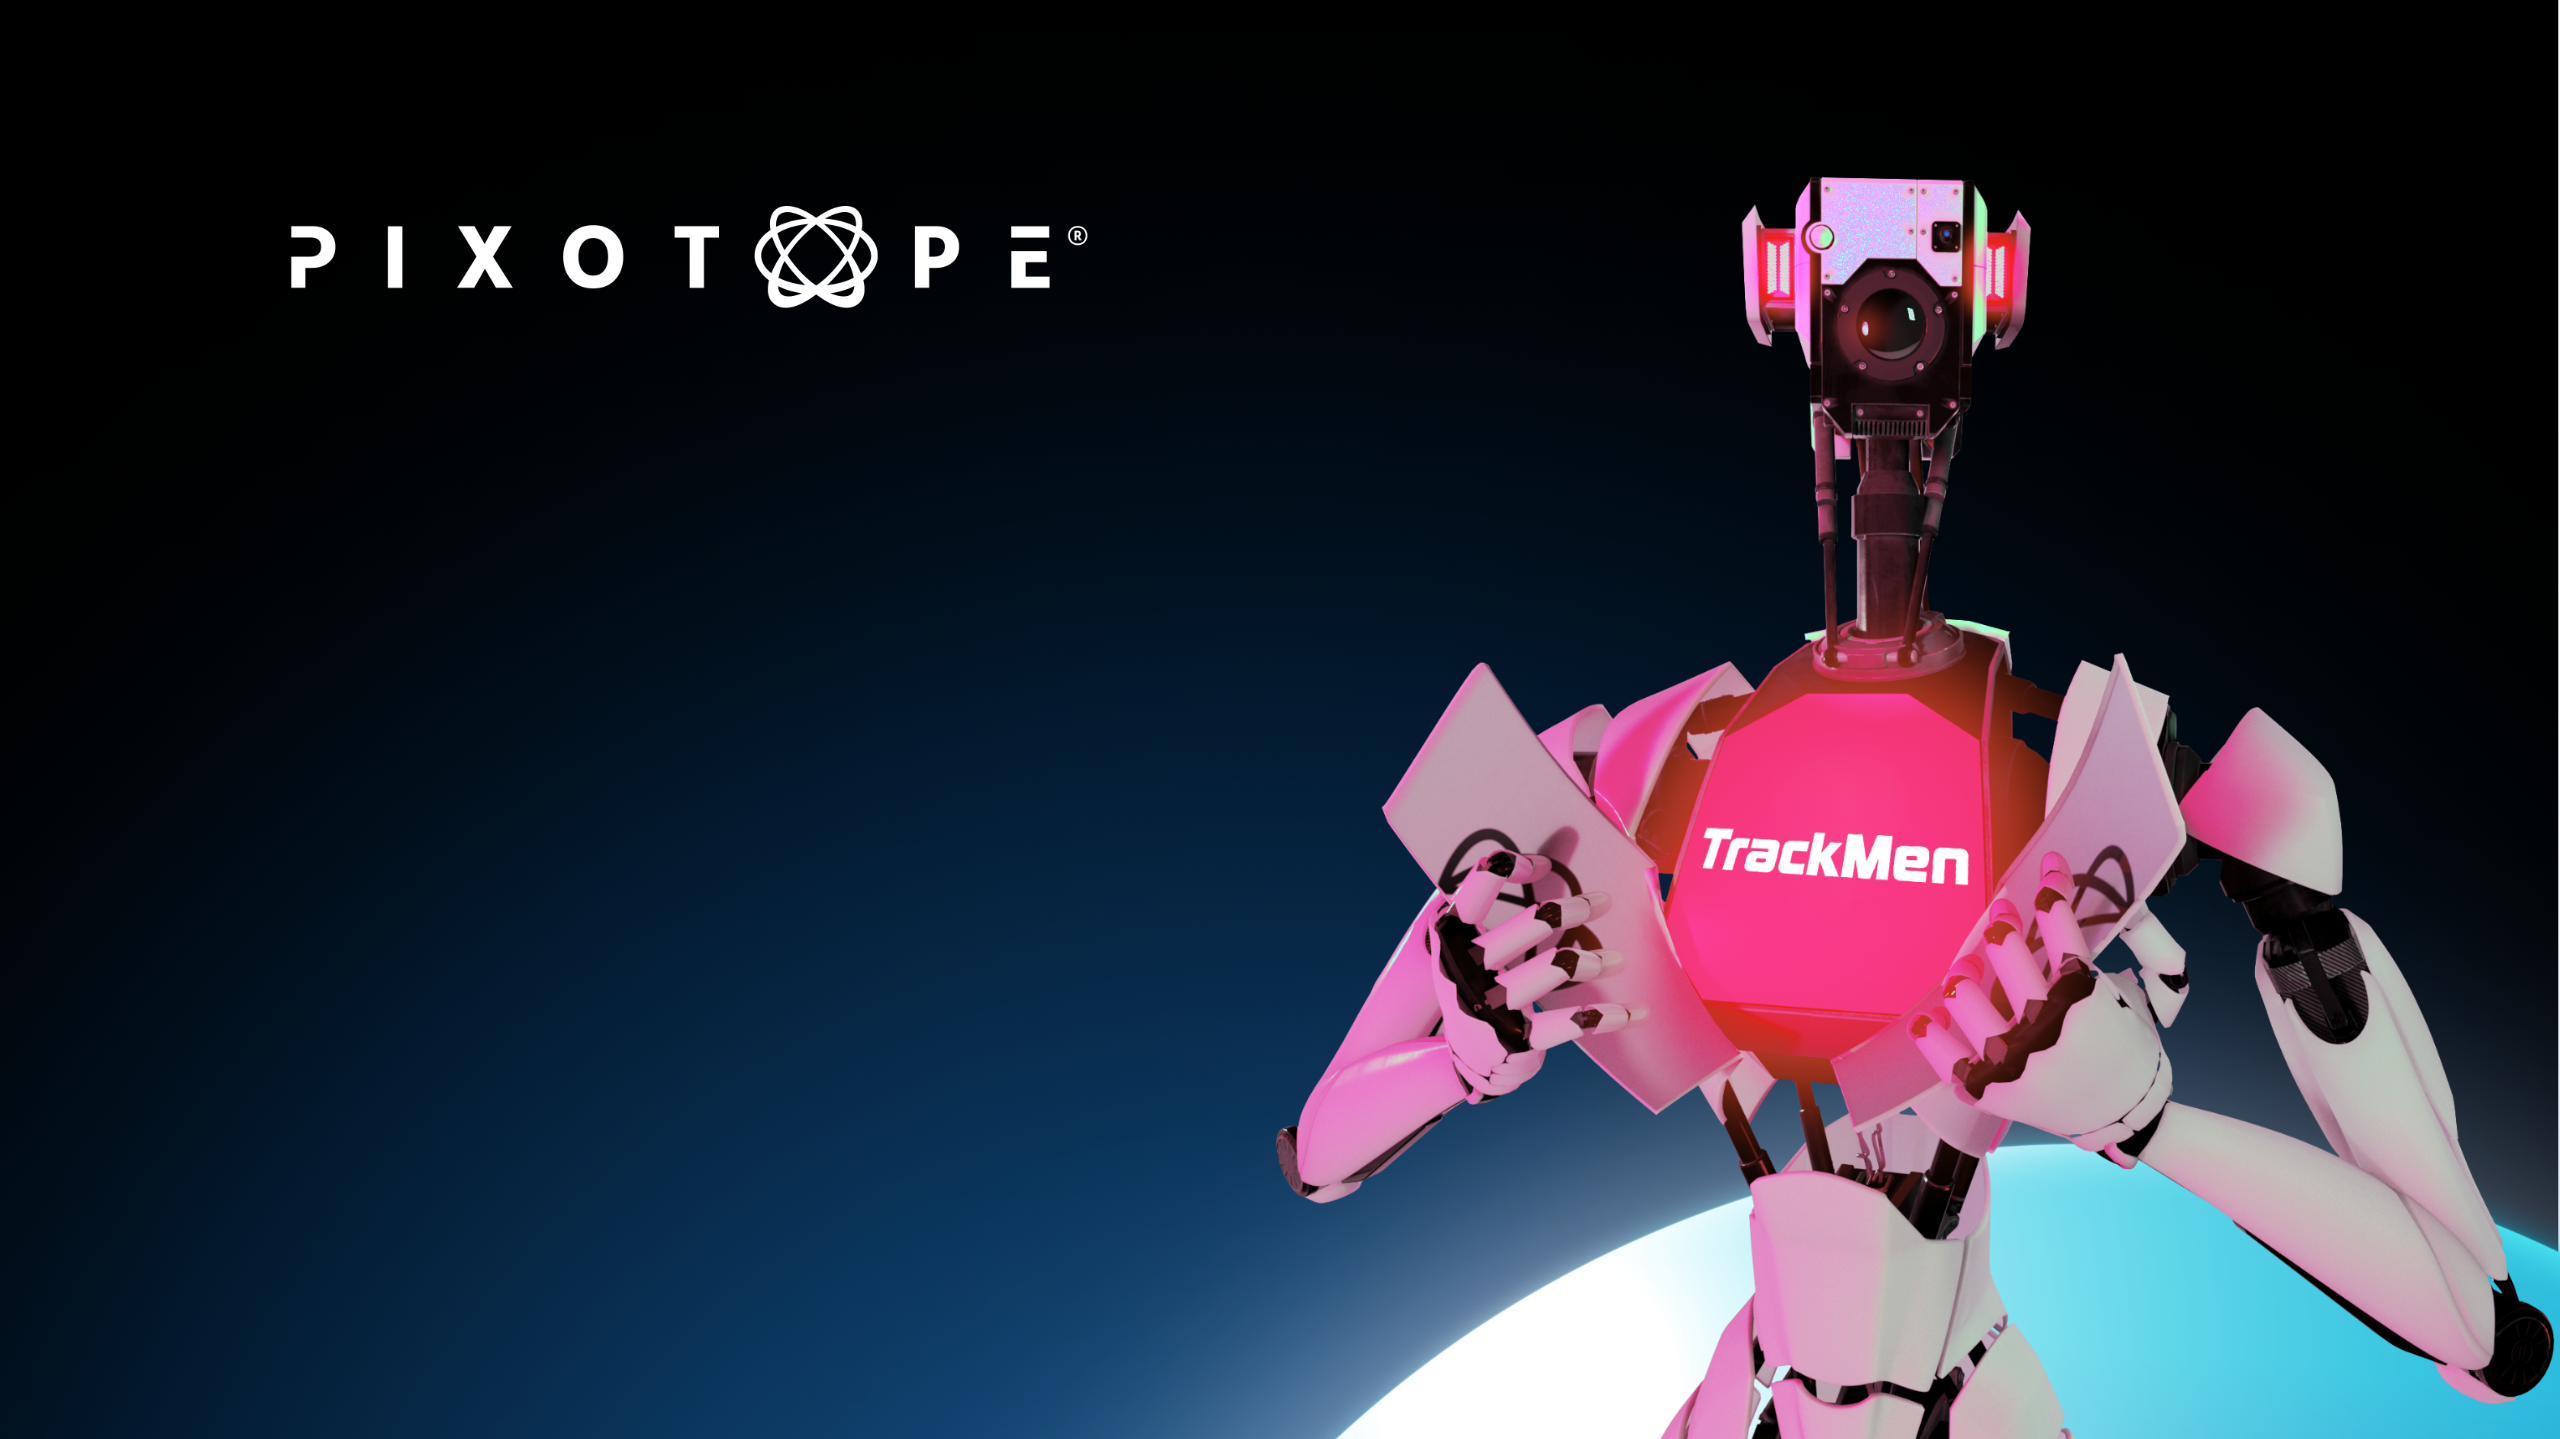 Pixotope Acquires TrackMen Real-time 3D Tracking Solutions